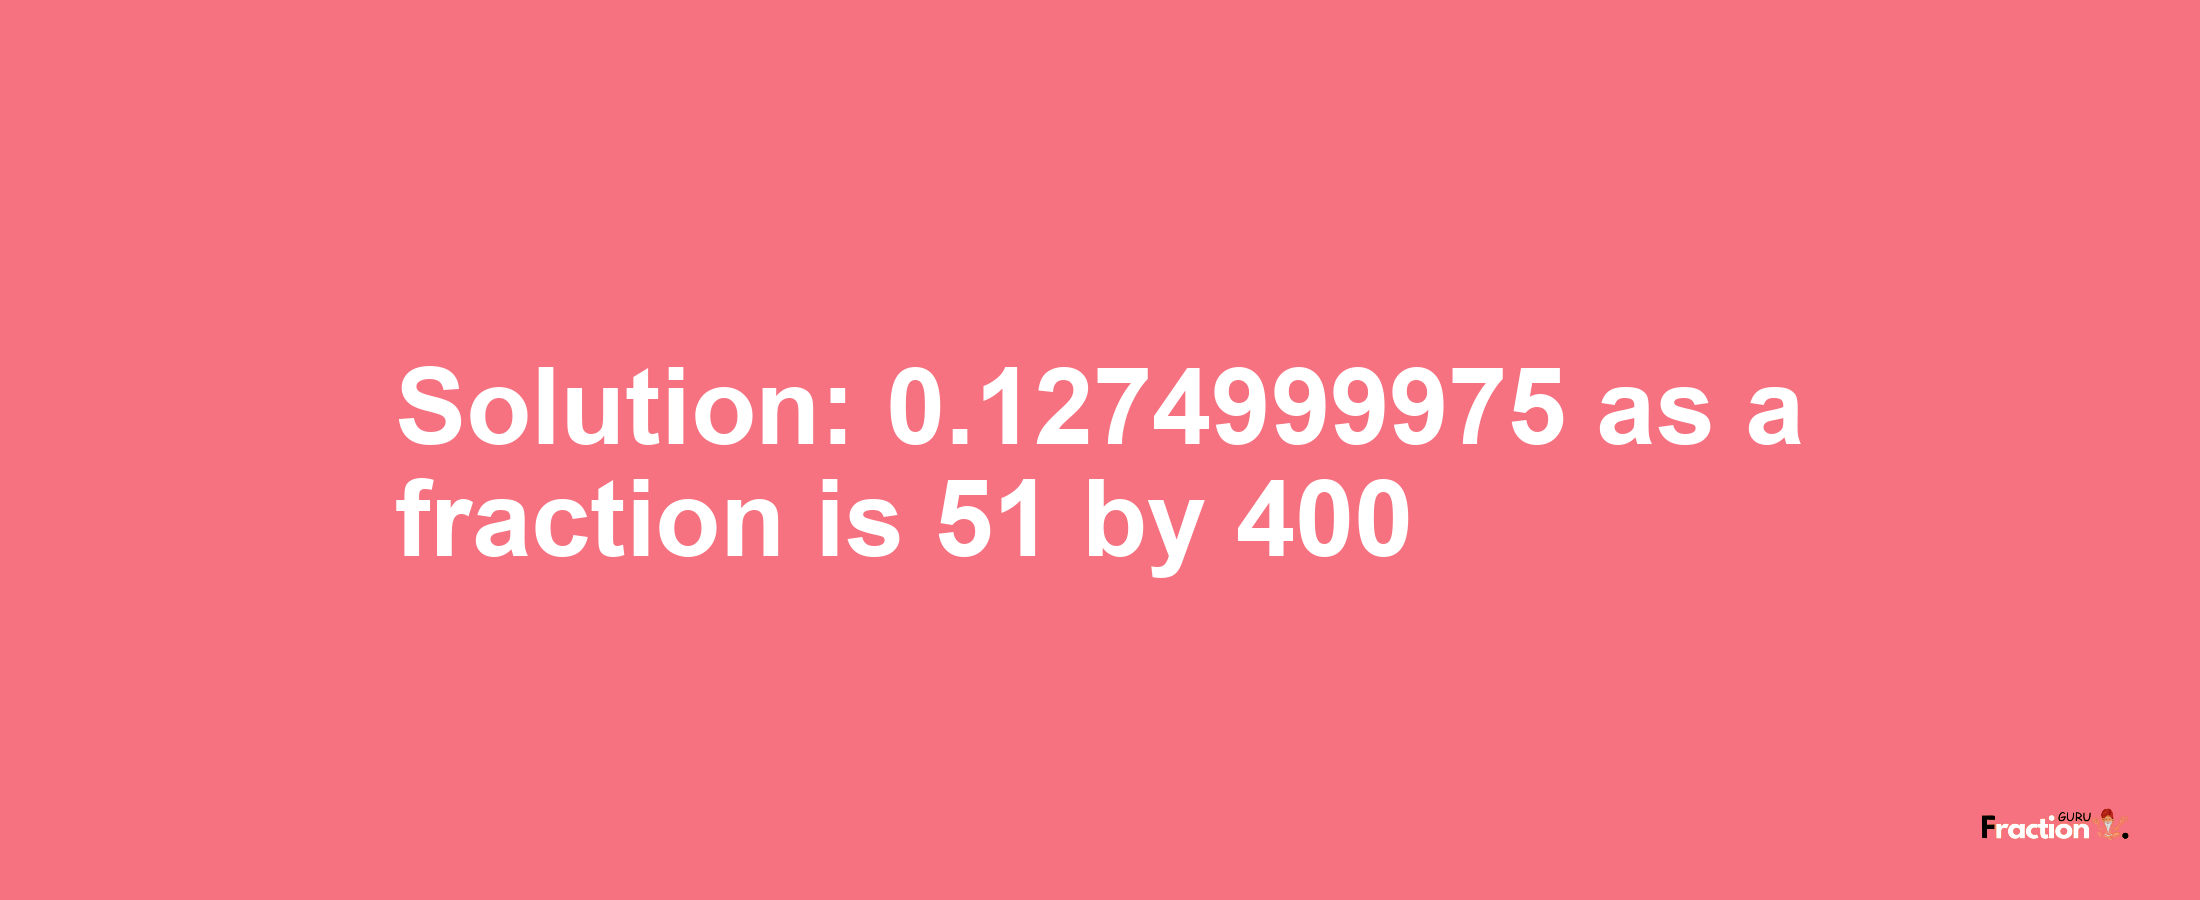 Solution:0.1274999975 as a fraction is 51/400